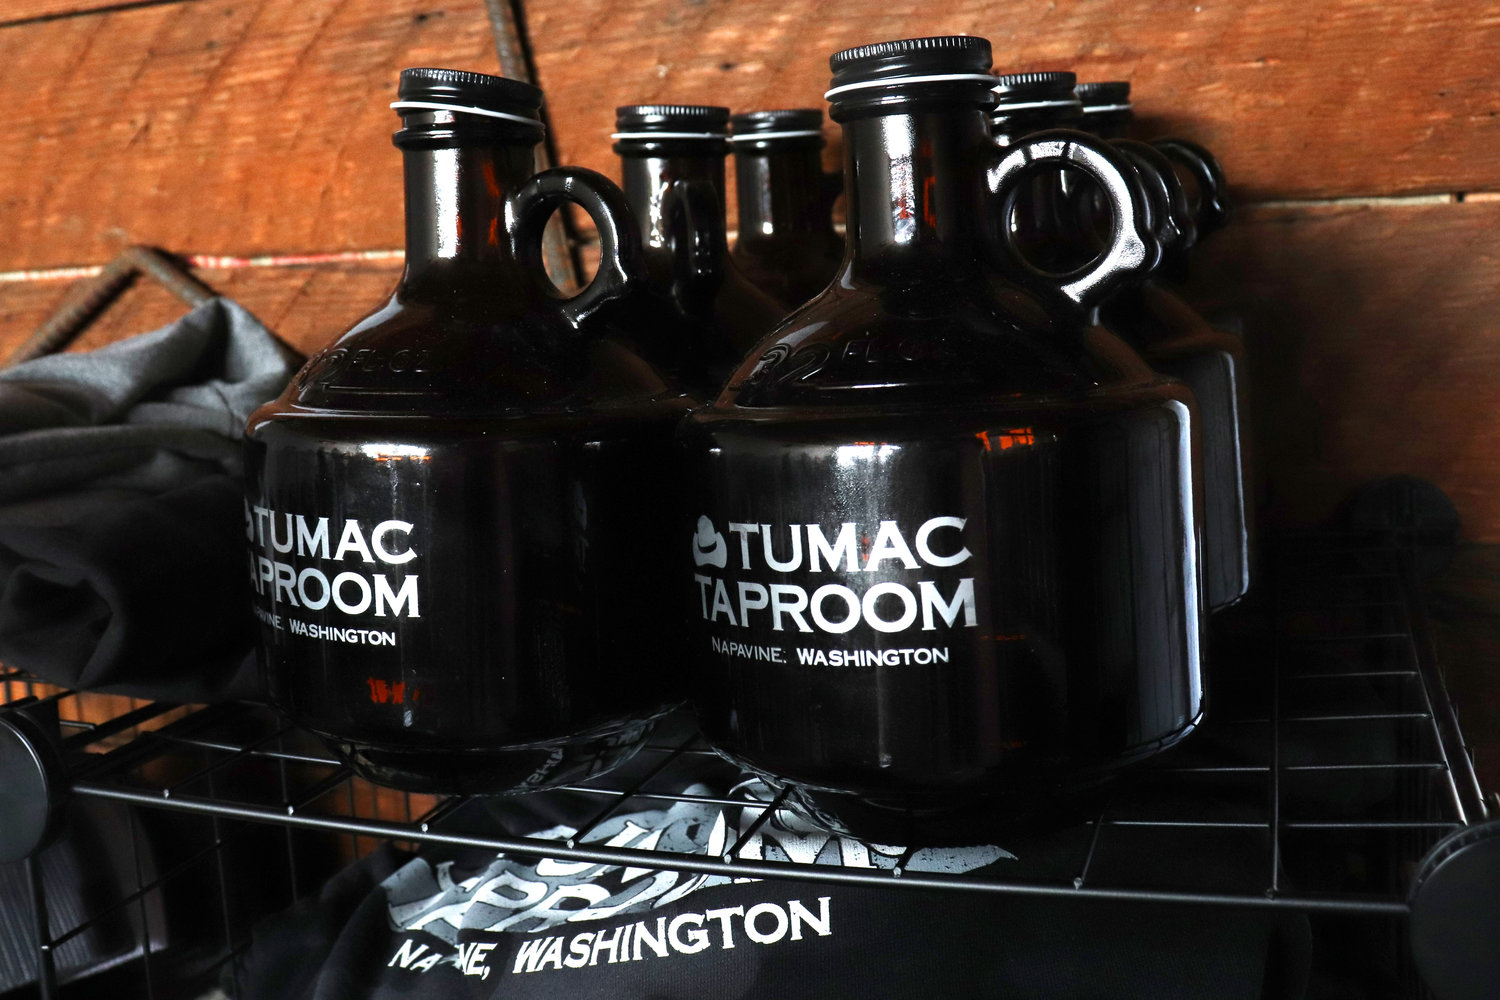 Tumac Taproom merch, including T-shirts and growlers, are on display for sale in Napavine on Friday.